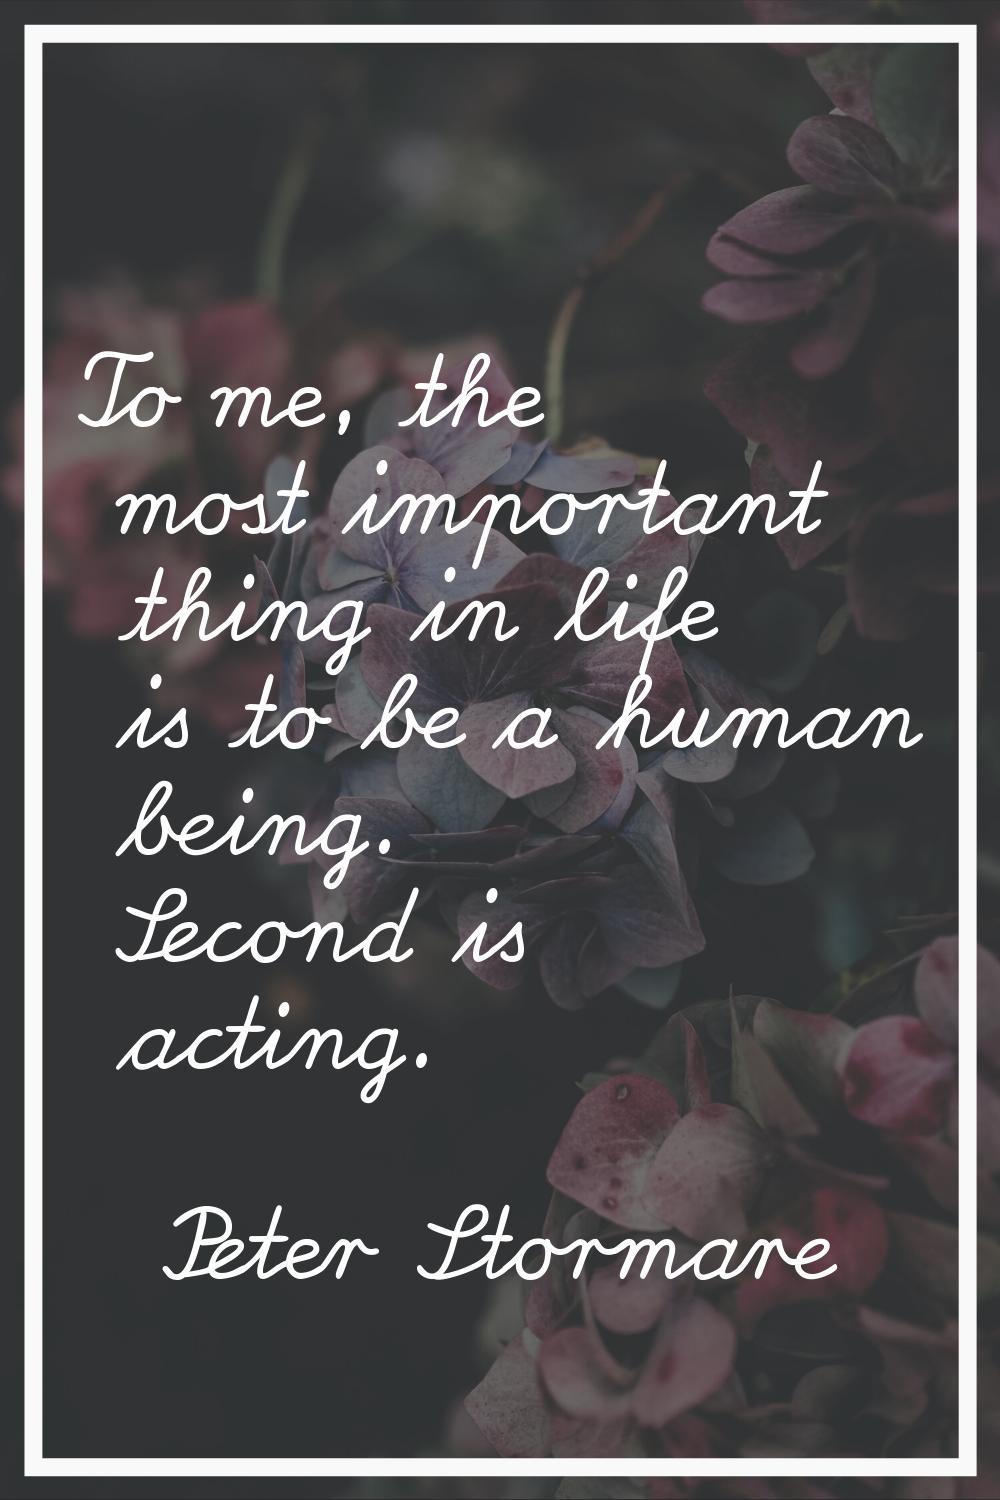 To me, the most important thing in life is to be a human being. Second is acting.